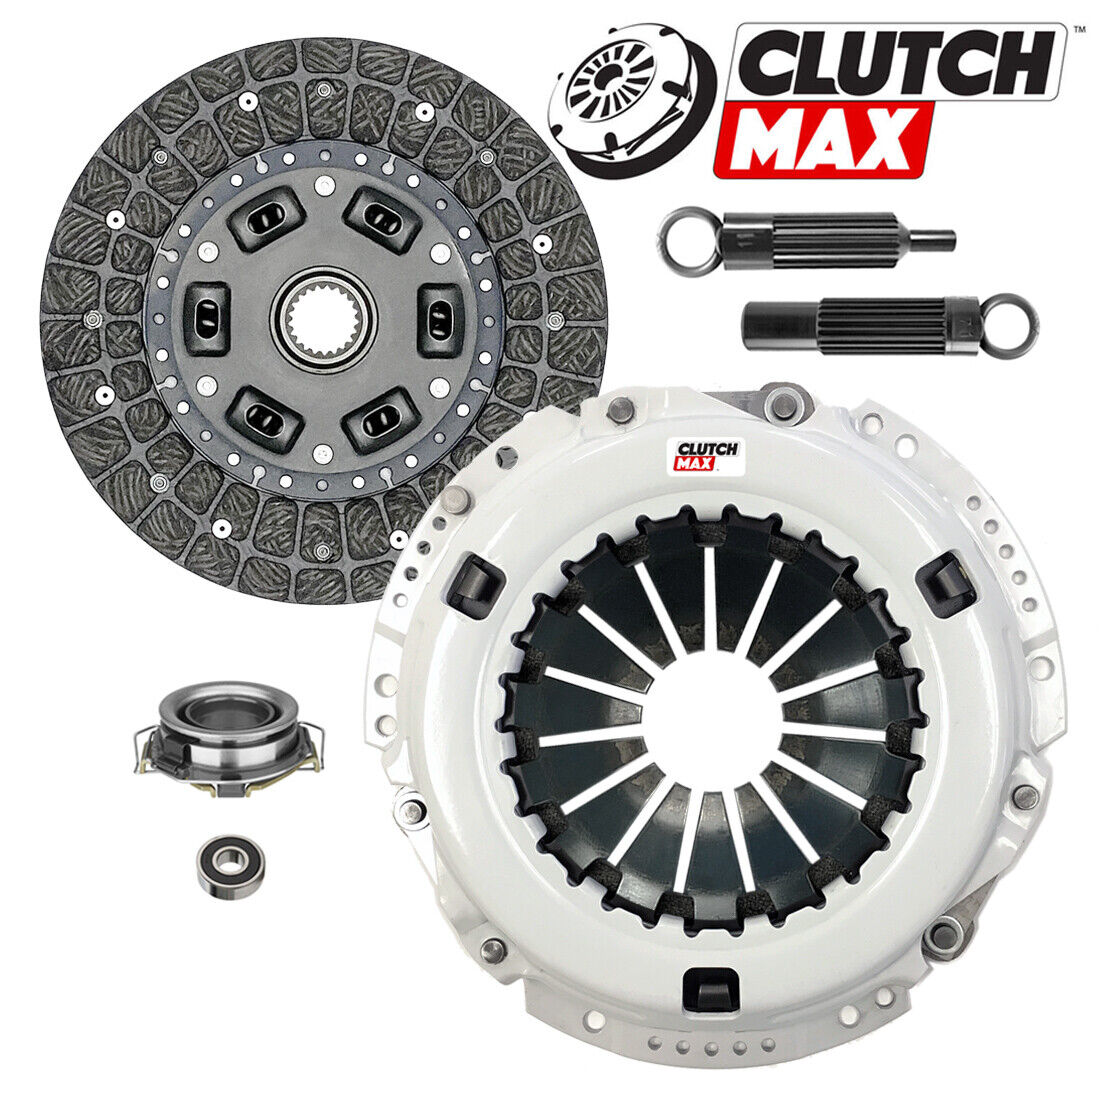 STAGE 1 PERFORMANCE CLUTCH KIT for 2005 2006 2007 2008 2009 2010 SCION TC 2.4L